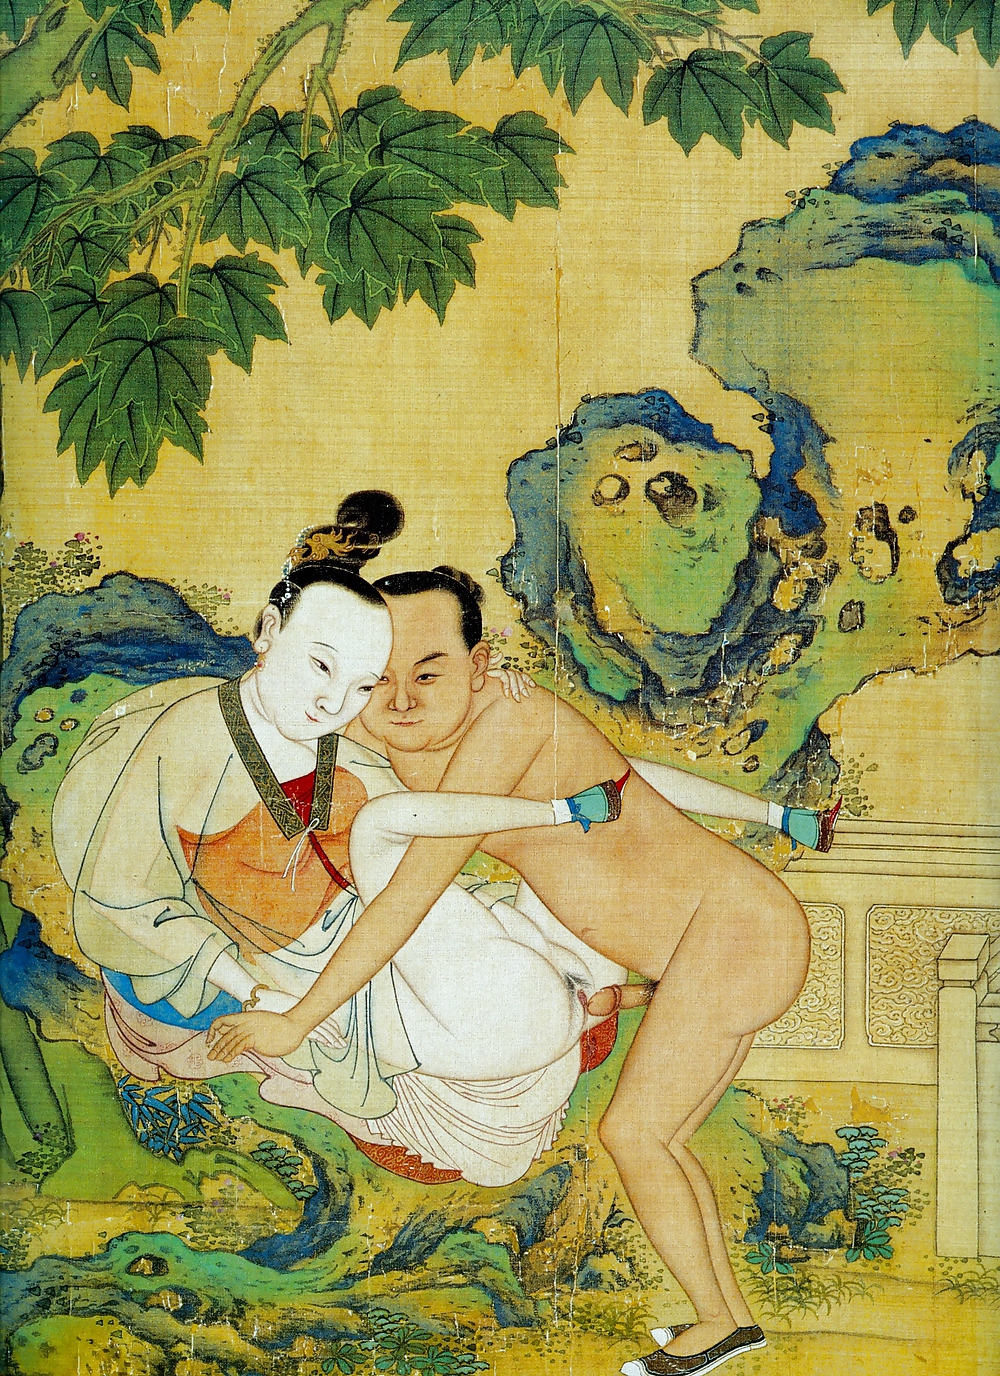 Drawn Ero and Porn Art 2 - Chinese Miniature Emperial Period #5517005